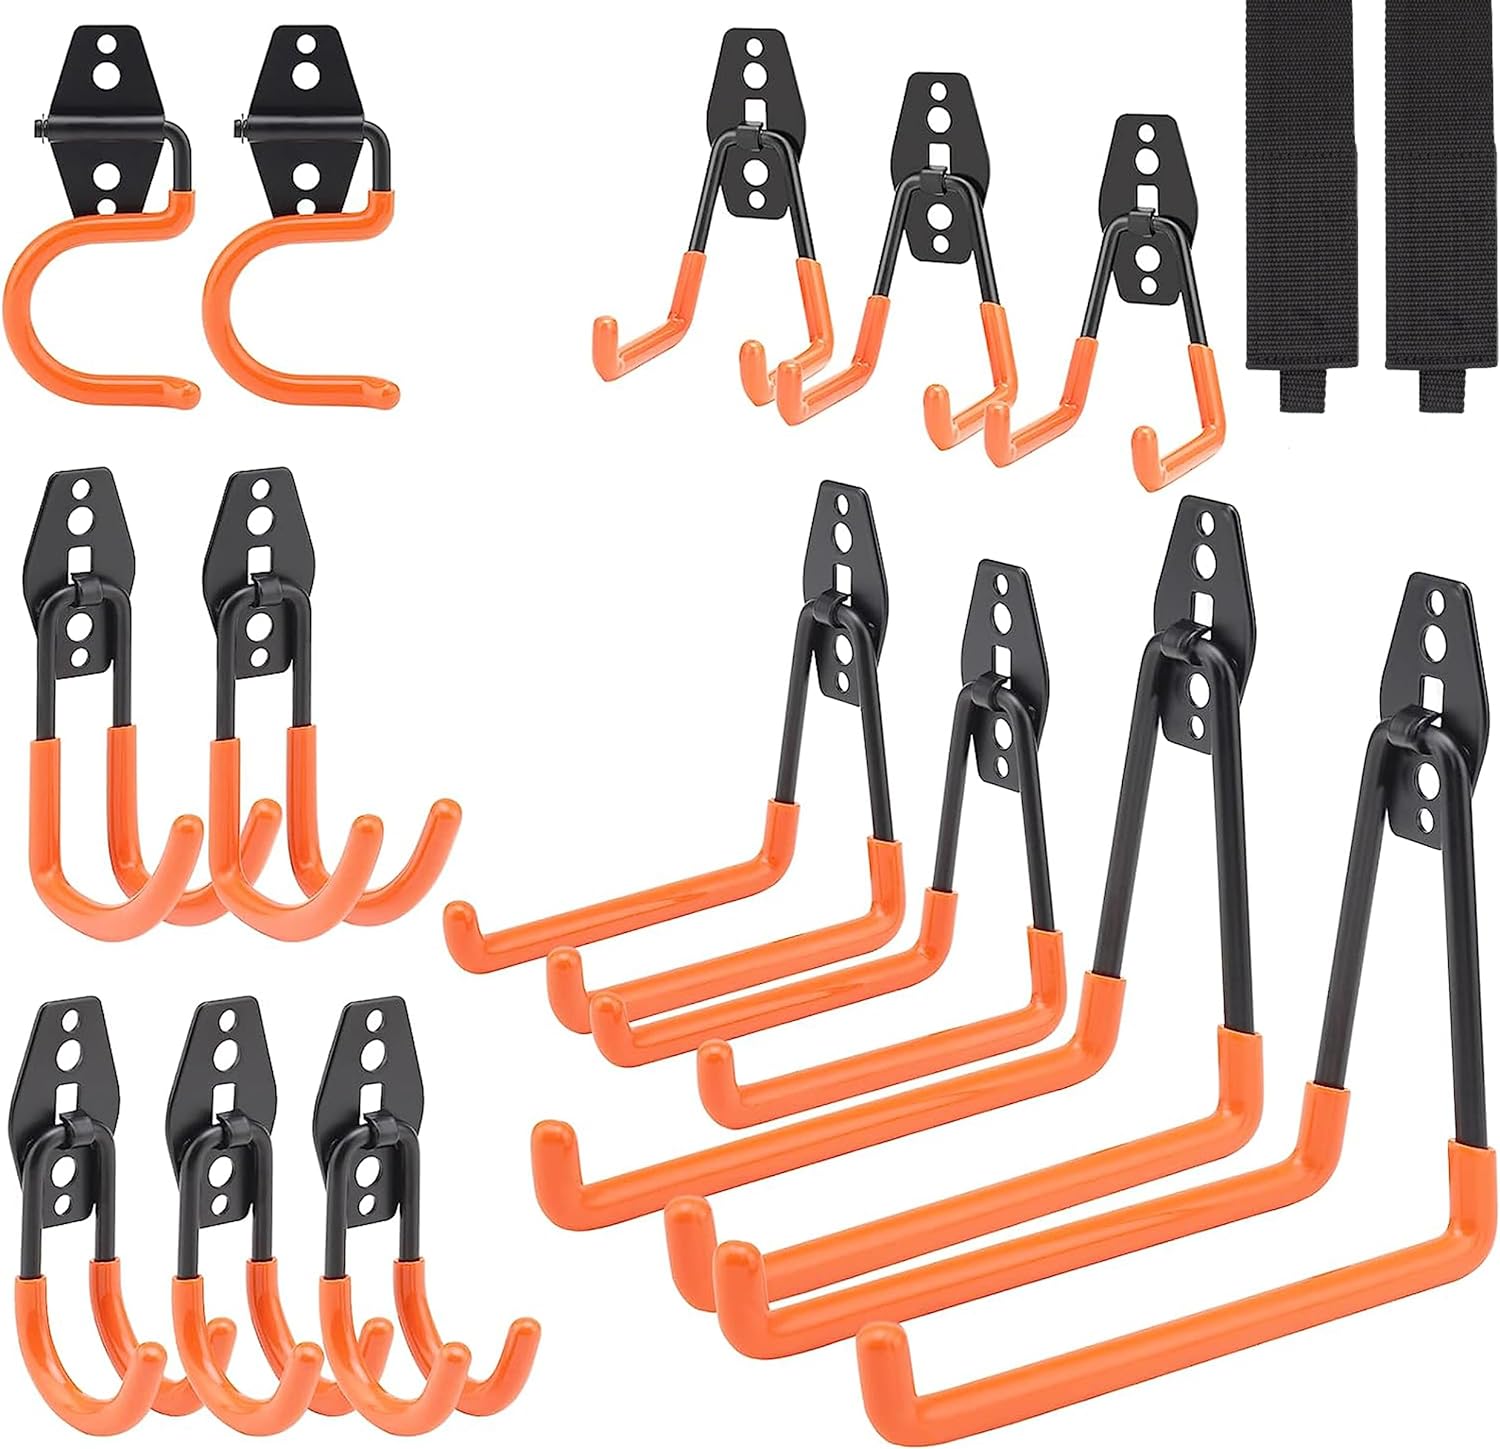 Upgraded 16 Packs Garage Hooks Utility Double Heavy Duty with Mop Broom Holders, Wall Mount Hooks, Garage Storage Organization and Tool Hangers for Power  Garden Tools, Ladders, Bikes(Orange)